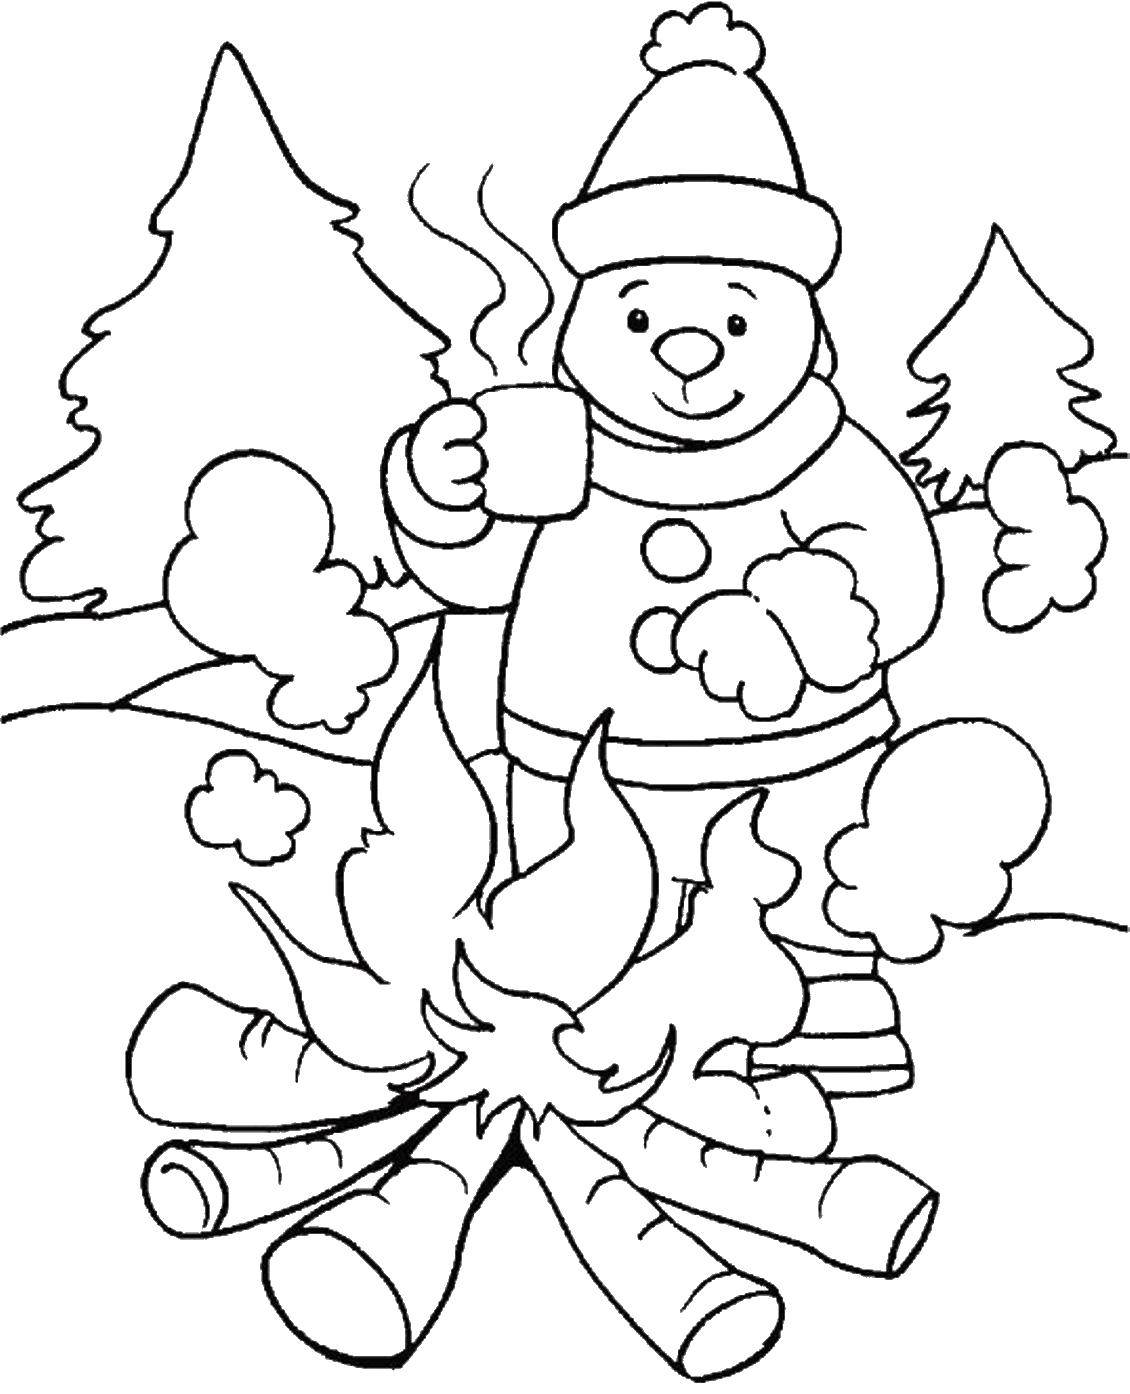 Coloring The bear and the campfire. Category coloring winter. Tags:  bear, winter, bonfire, circle.